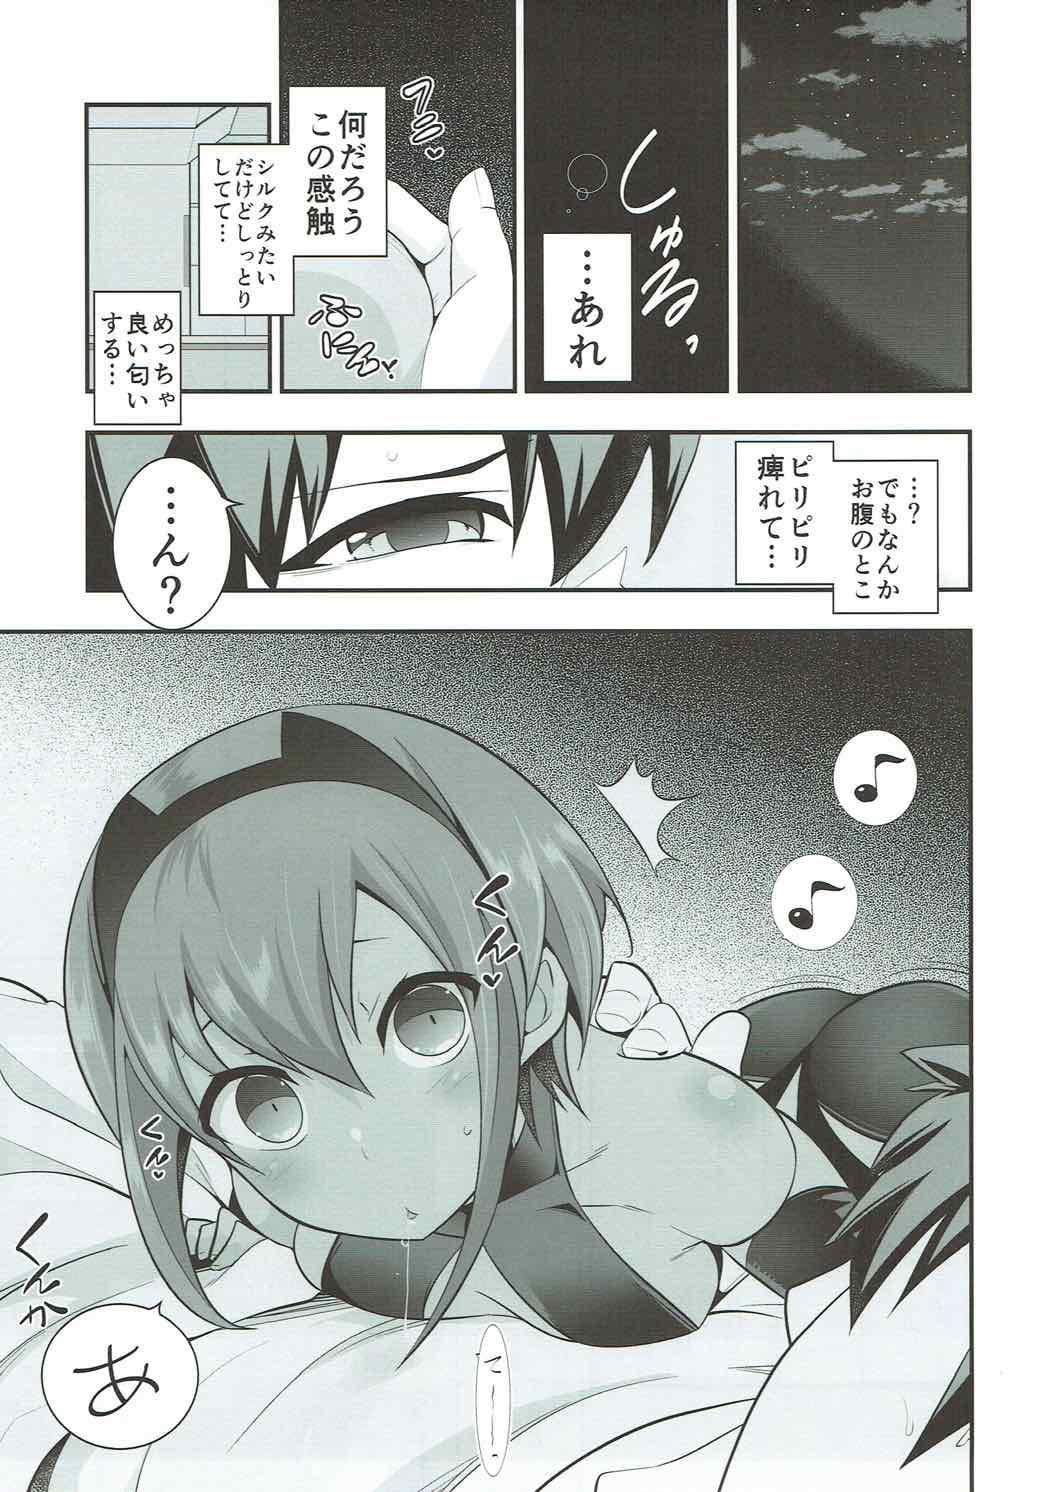 Hogtied Natsuita - Fate grand order Fitness - Page 4